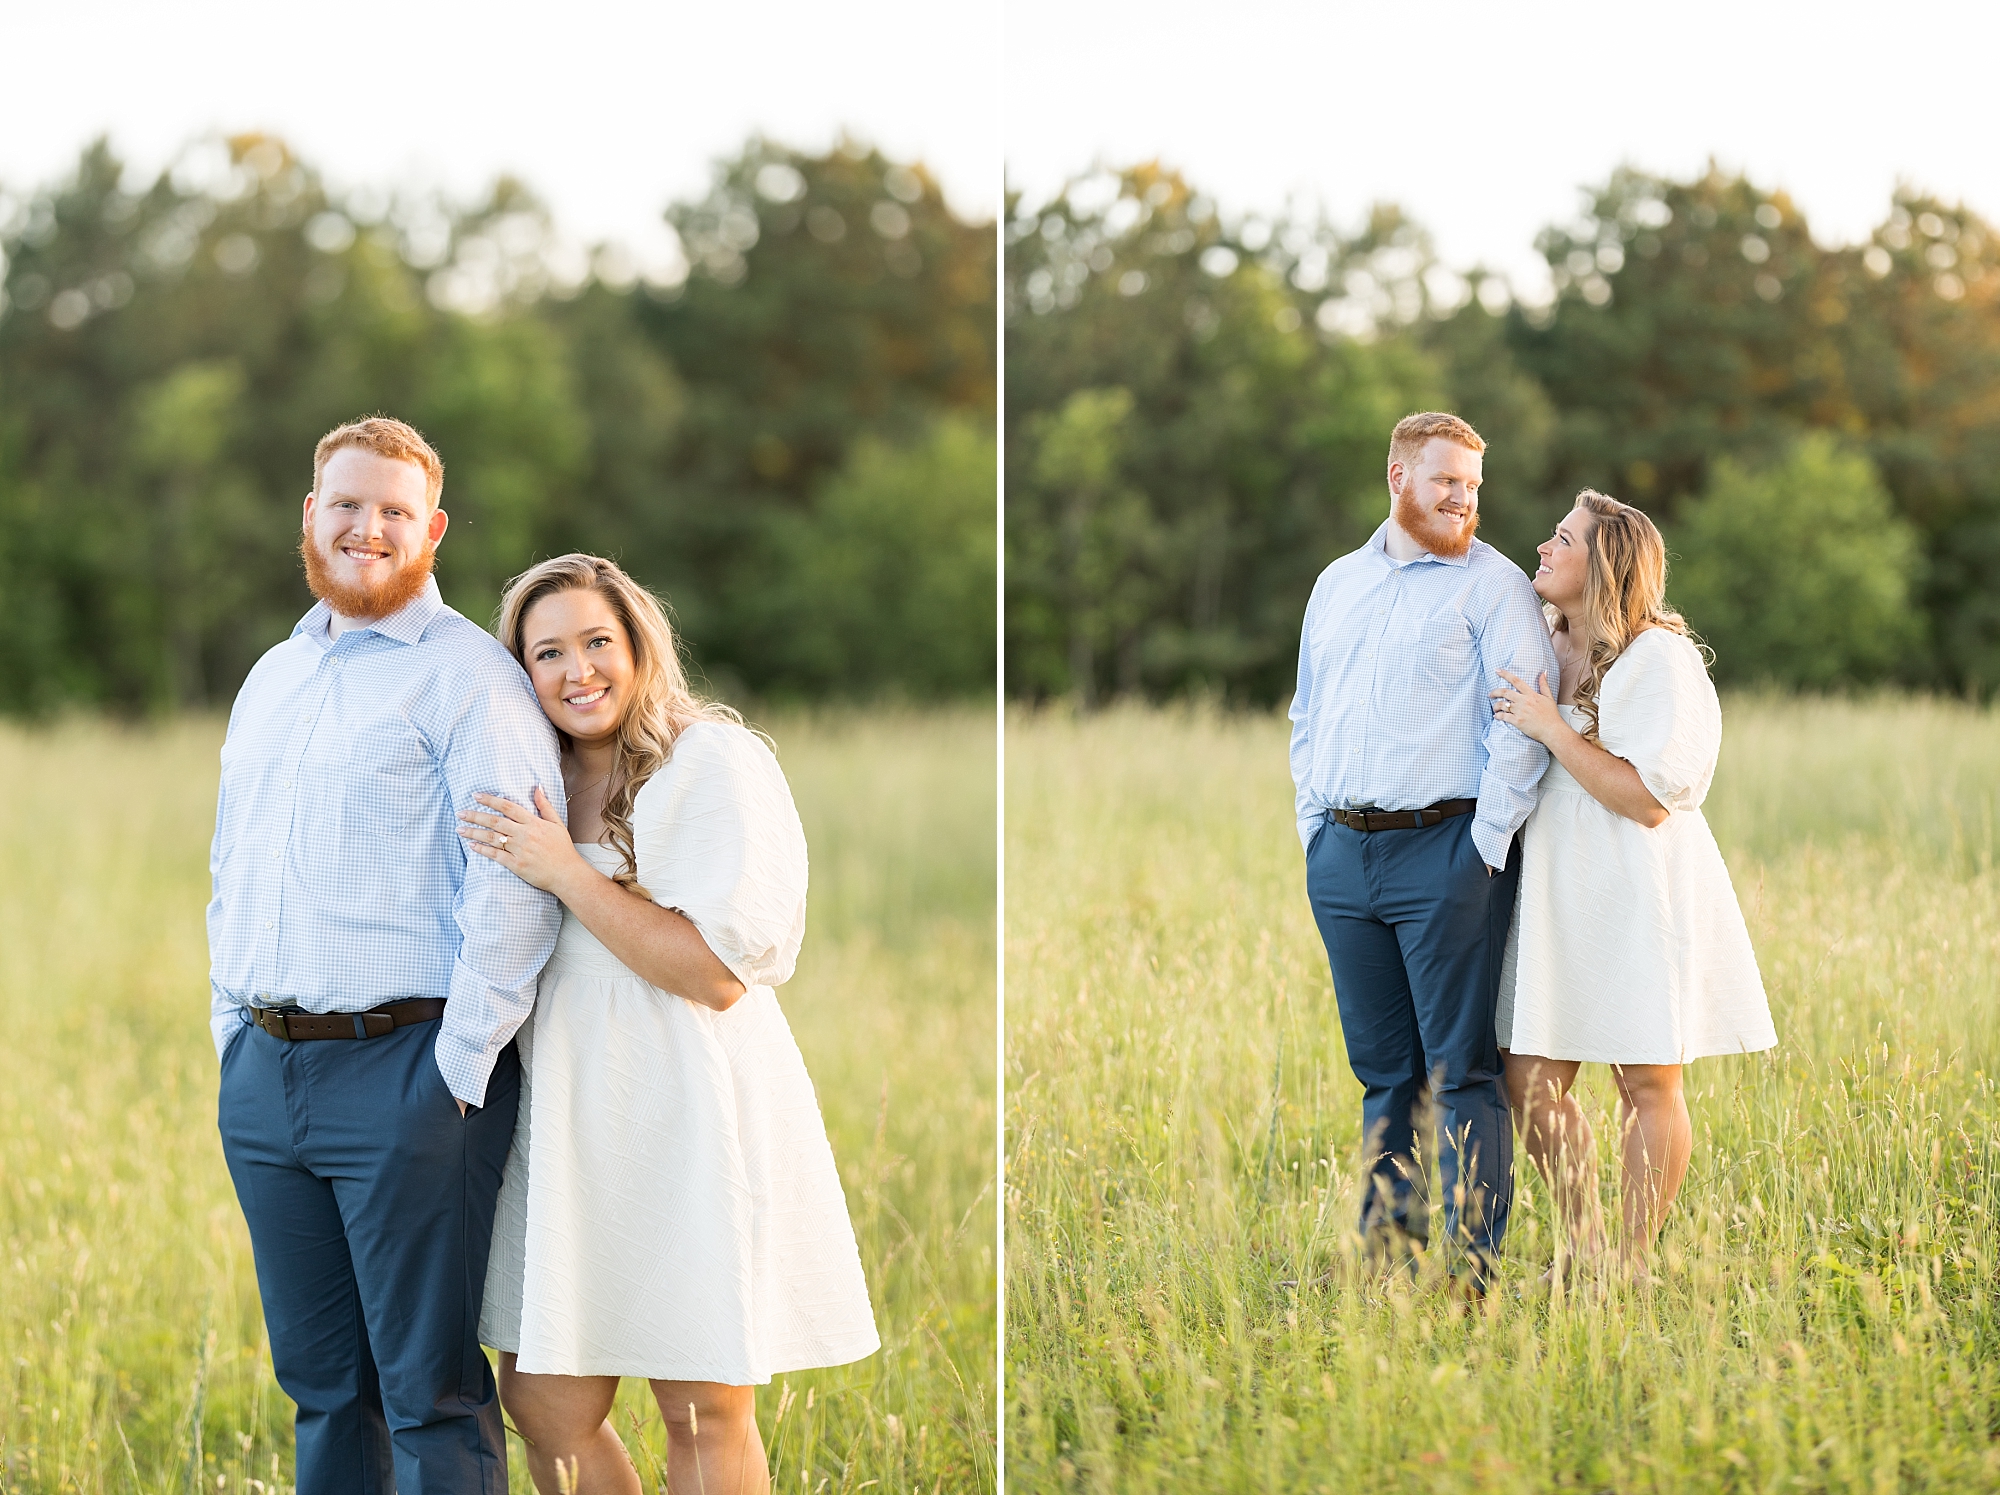 Golden Hour Sunset engagement photos at the NC Museum of Art in Raleigh | Raleigh NC Engagement Photographer